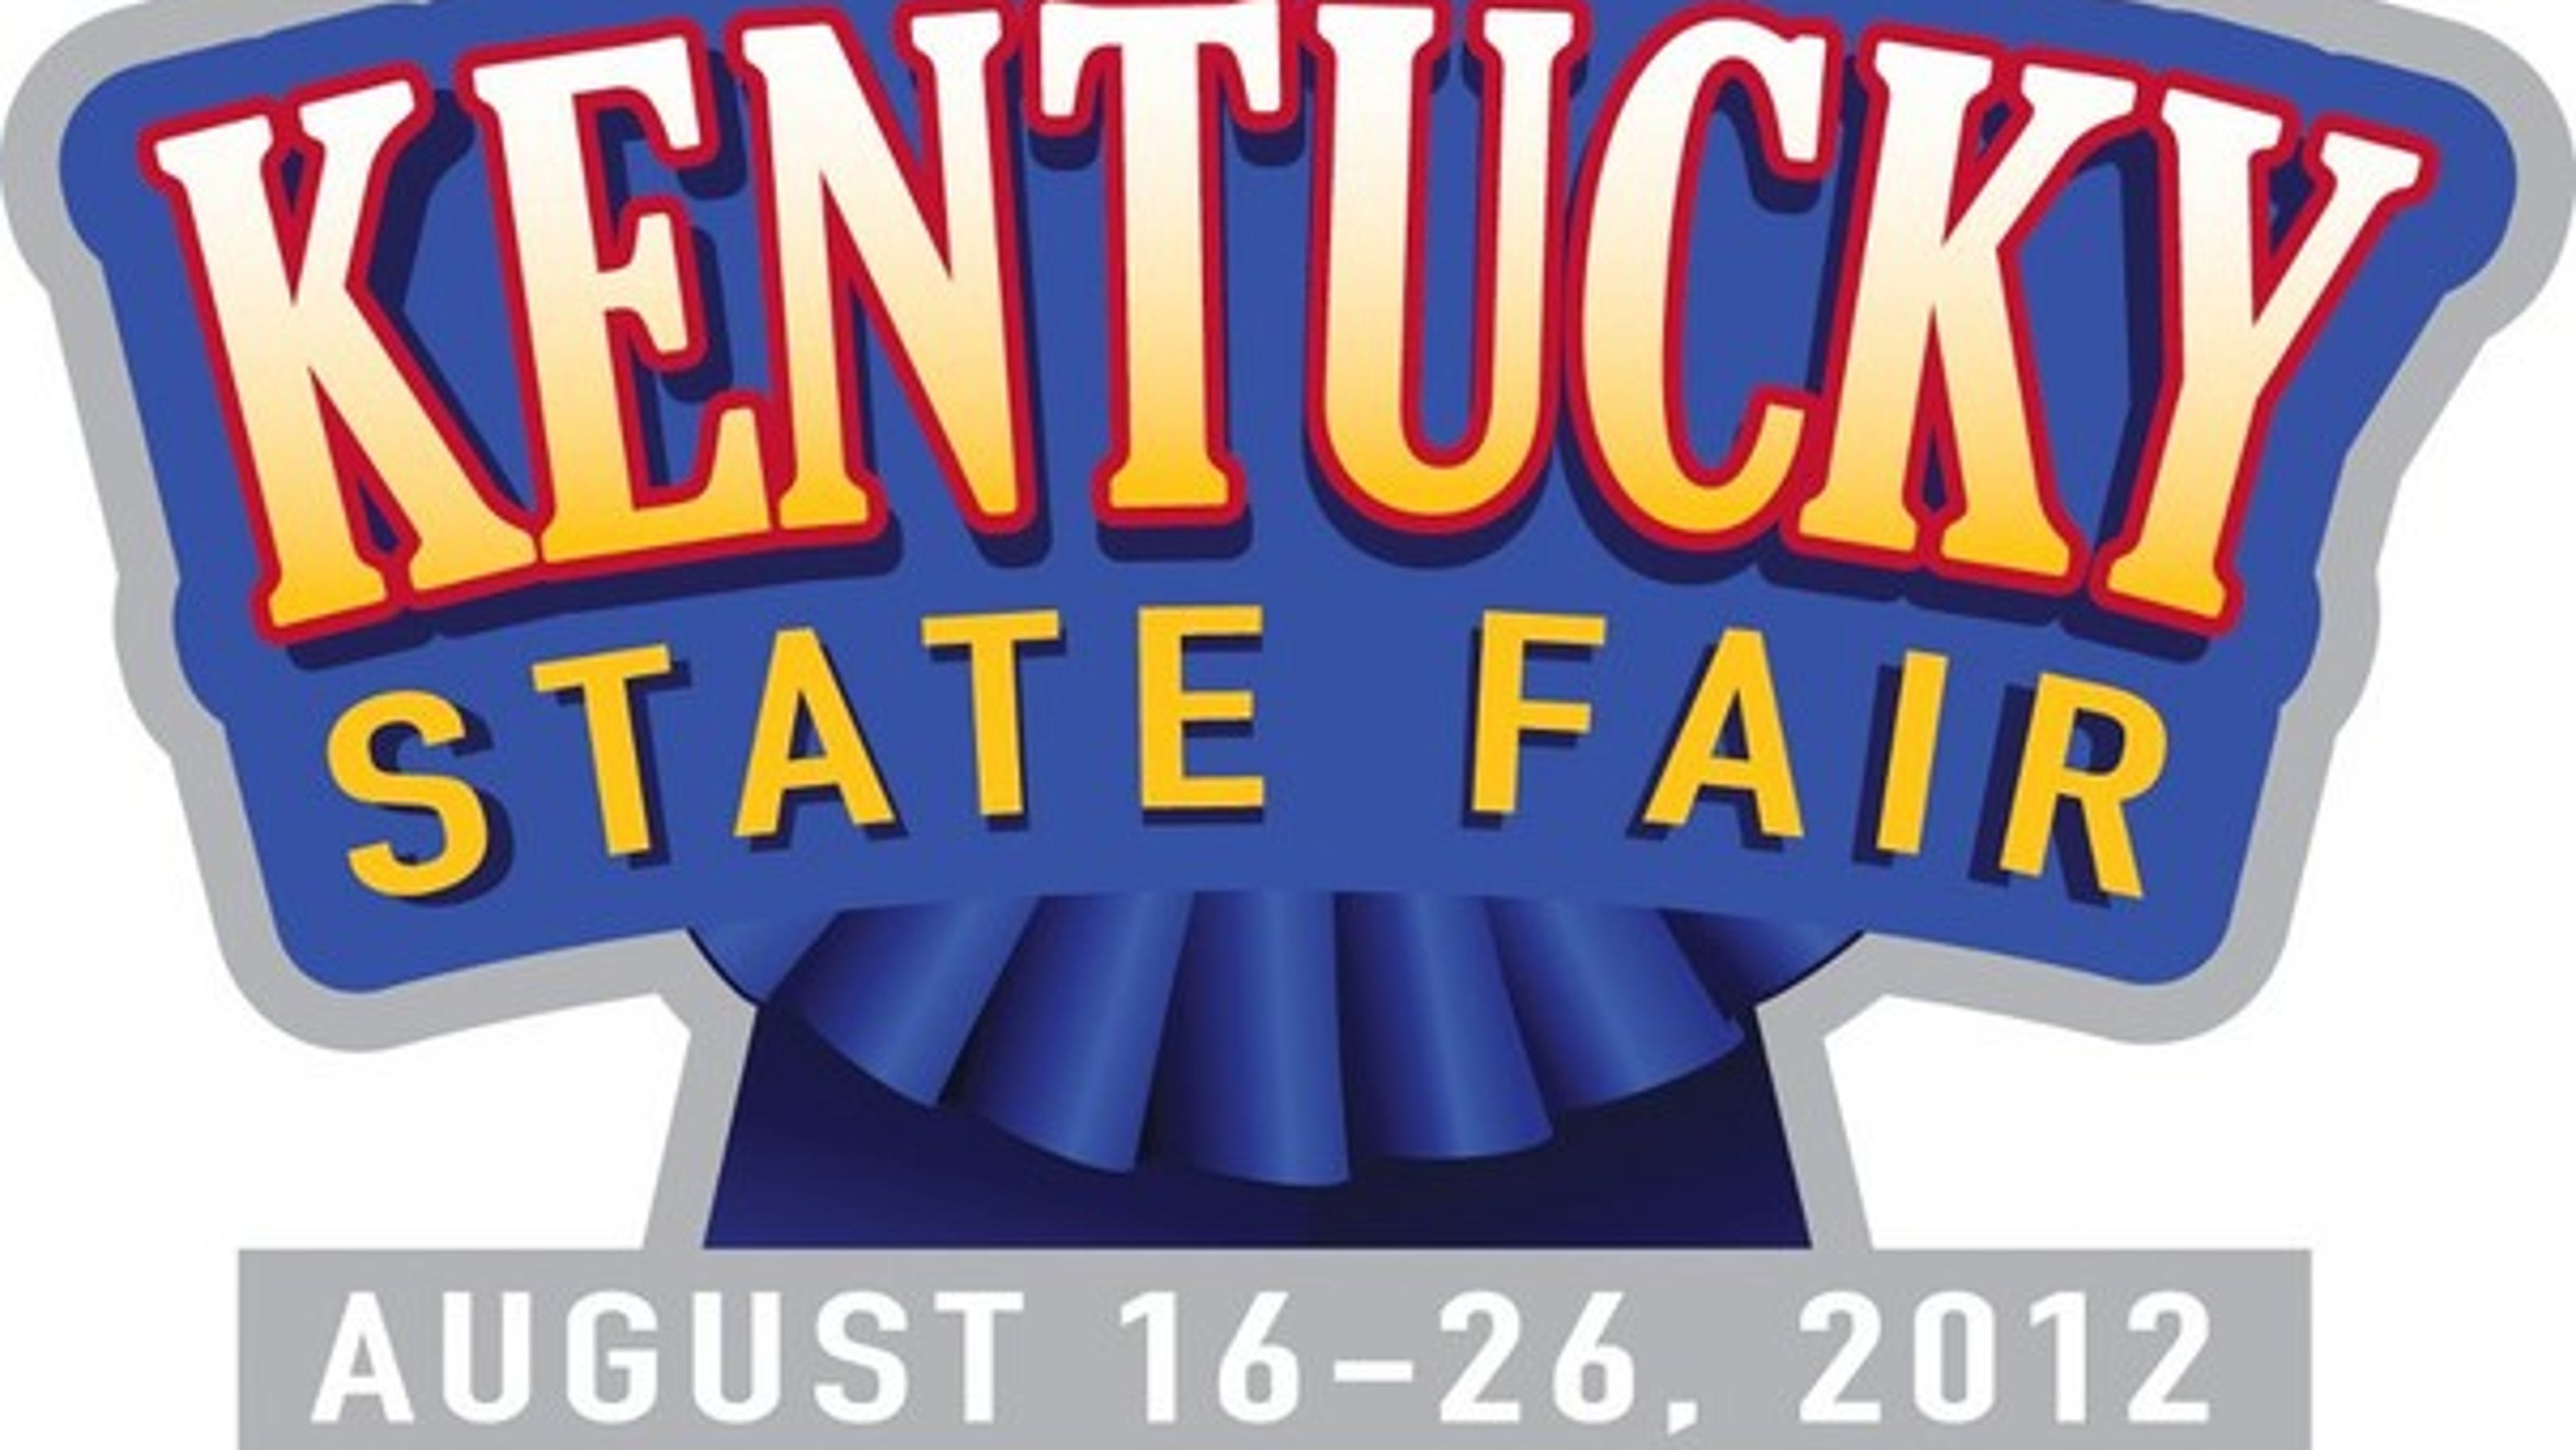 Discount Kentucky State Fair tickets available Sunday